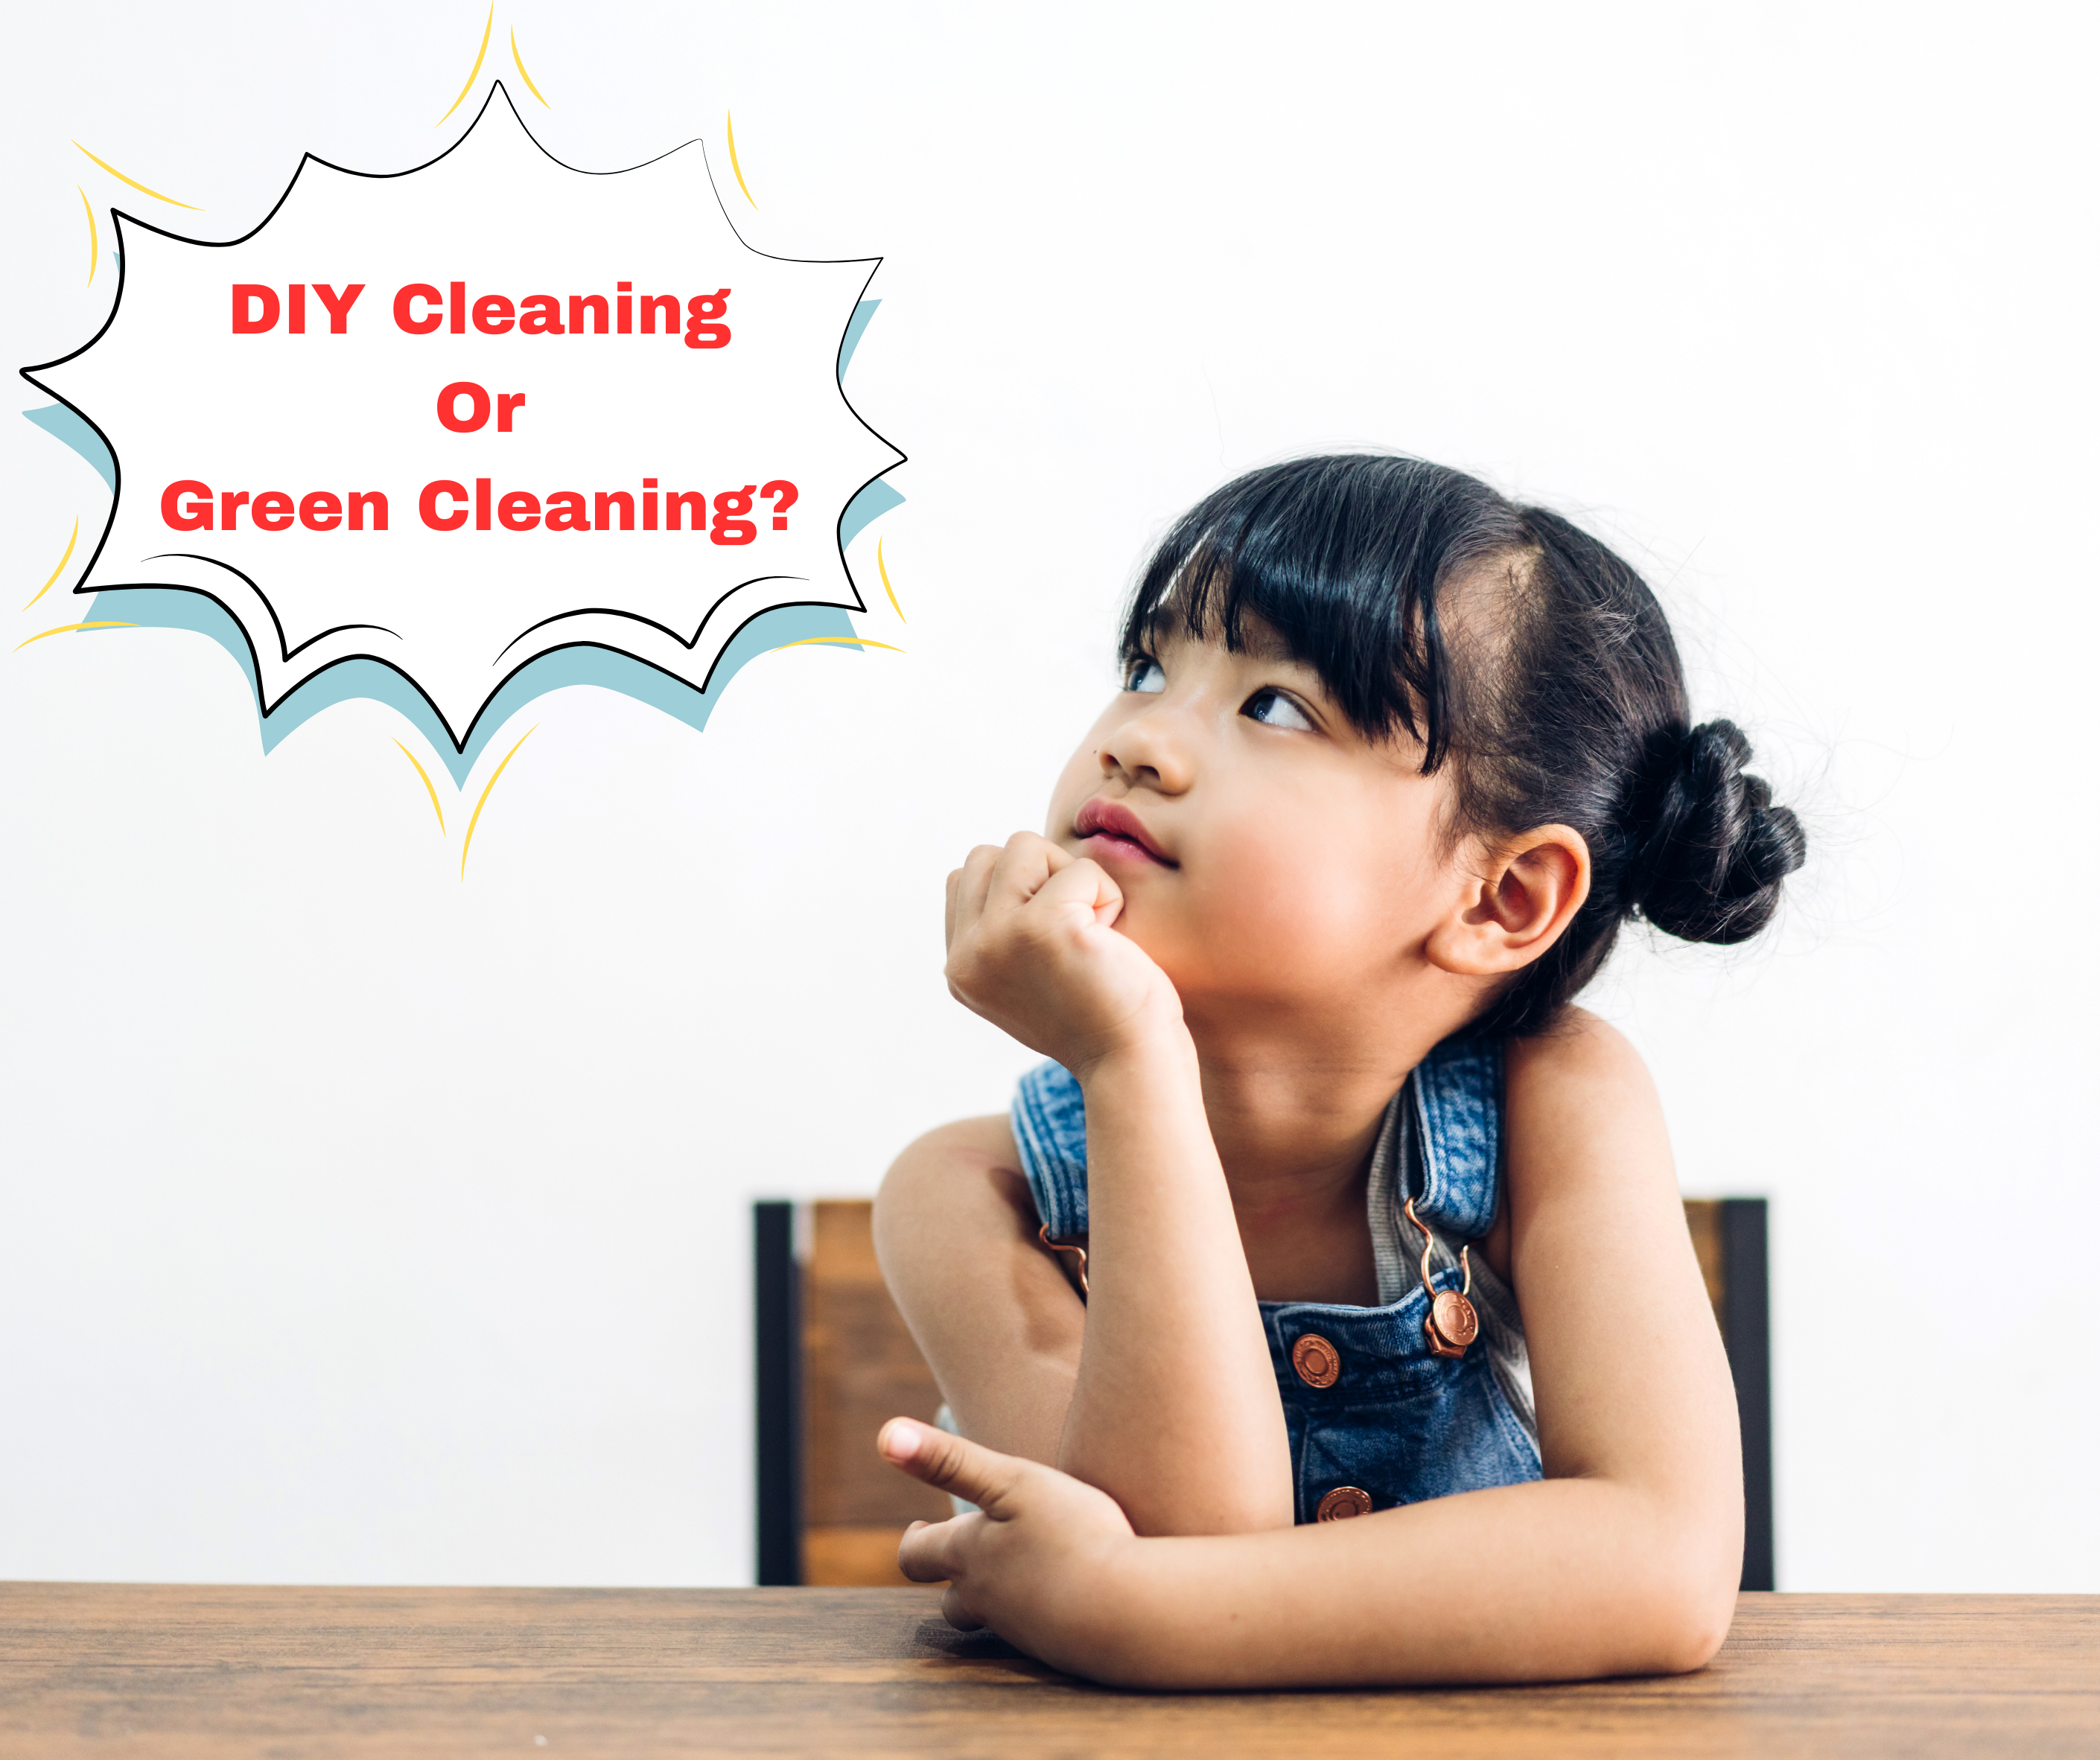 What are DIY and Green Cleaning? Which way is better to use?